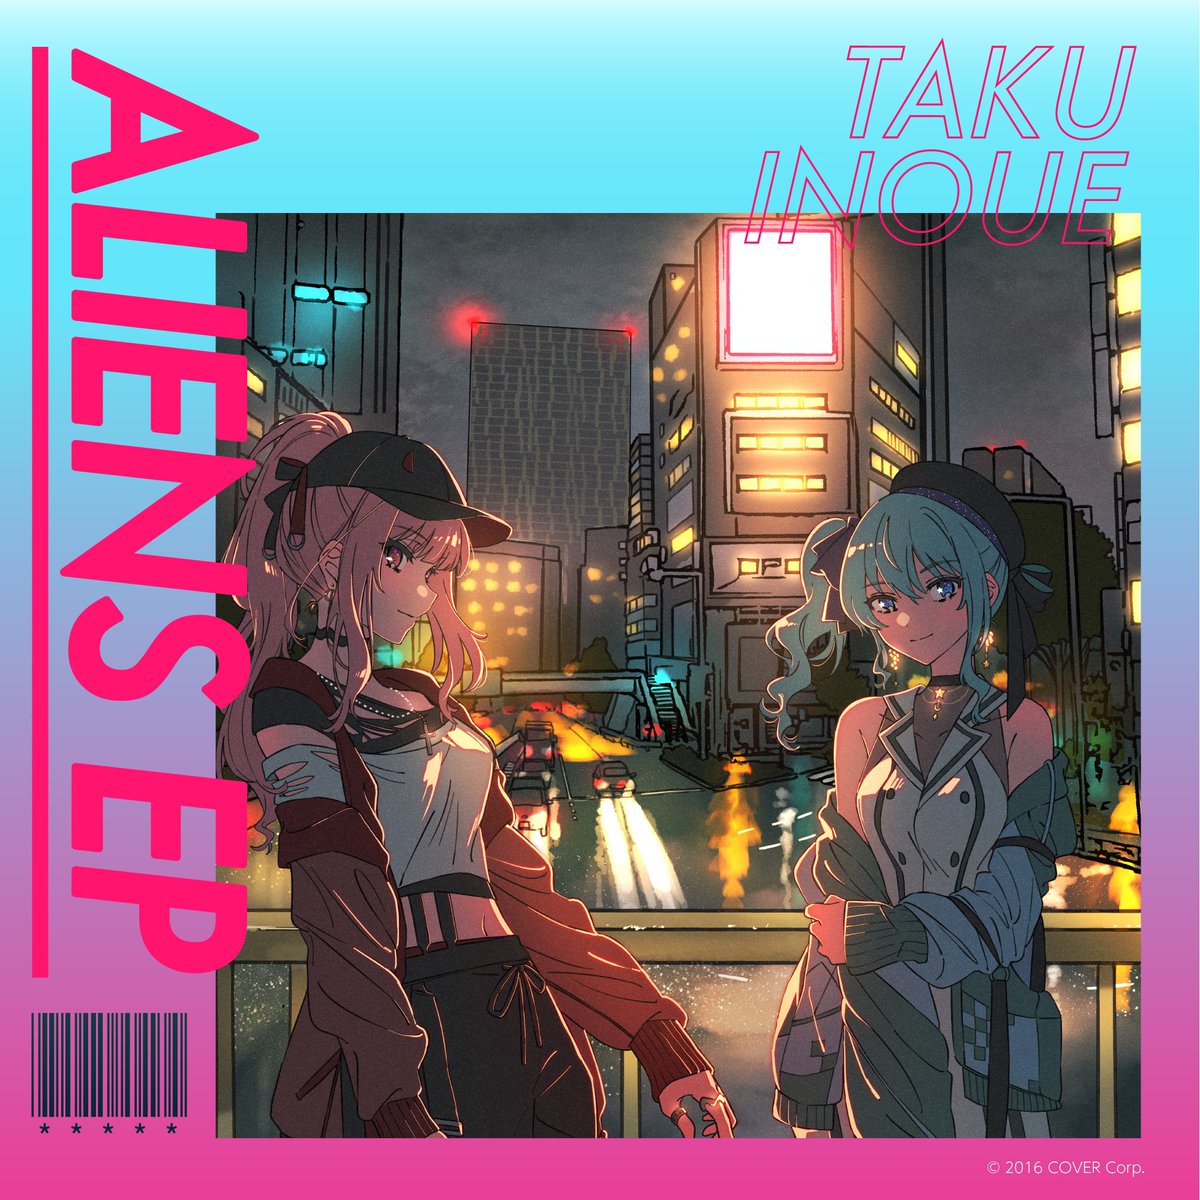 Cover for『TAKU INOUE - Club Aquila』from the release『ALIENS EP』